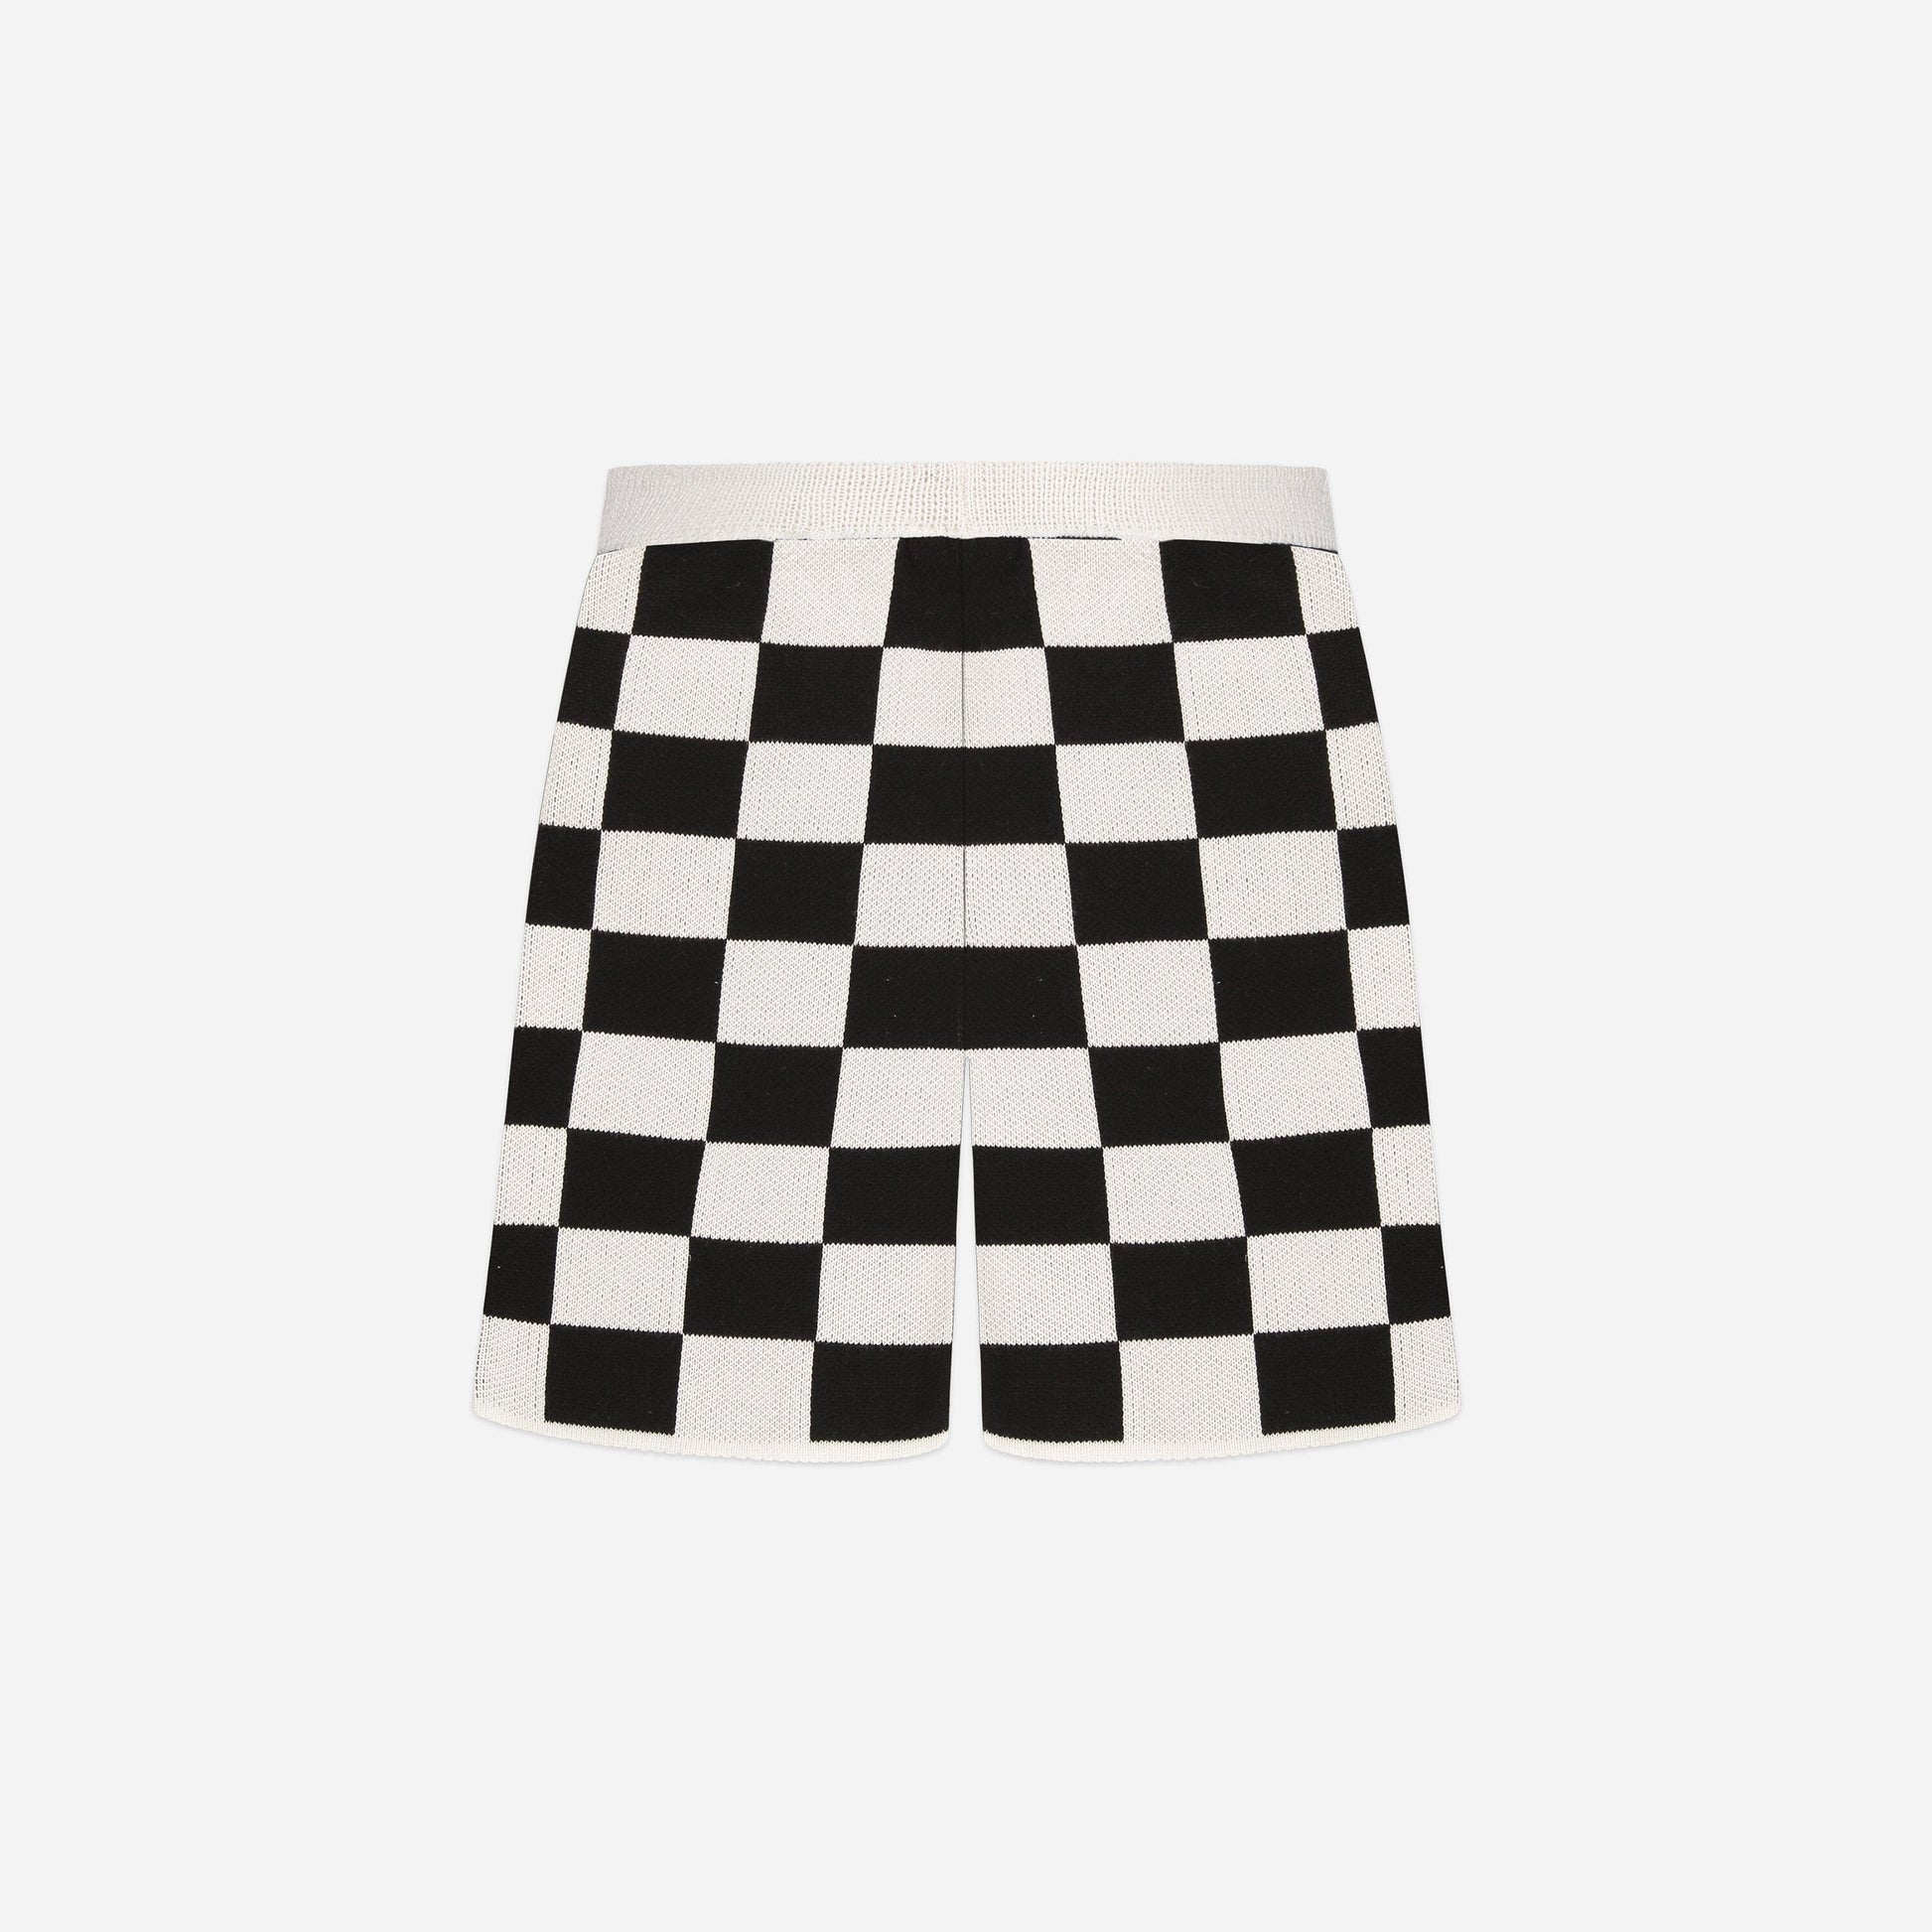 Knitted Shorts in Black/White Checkers